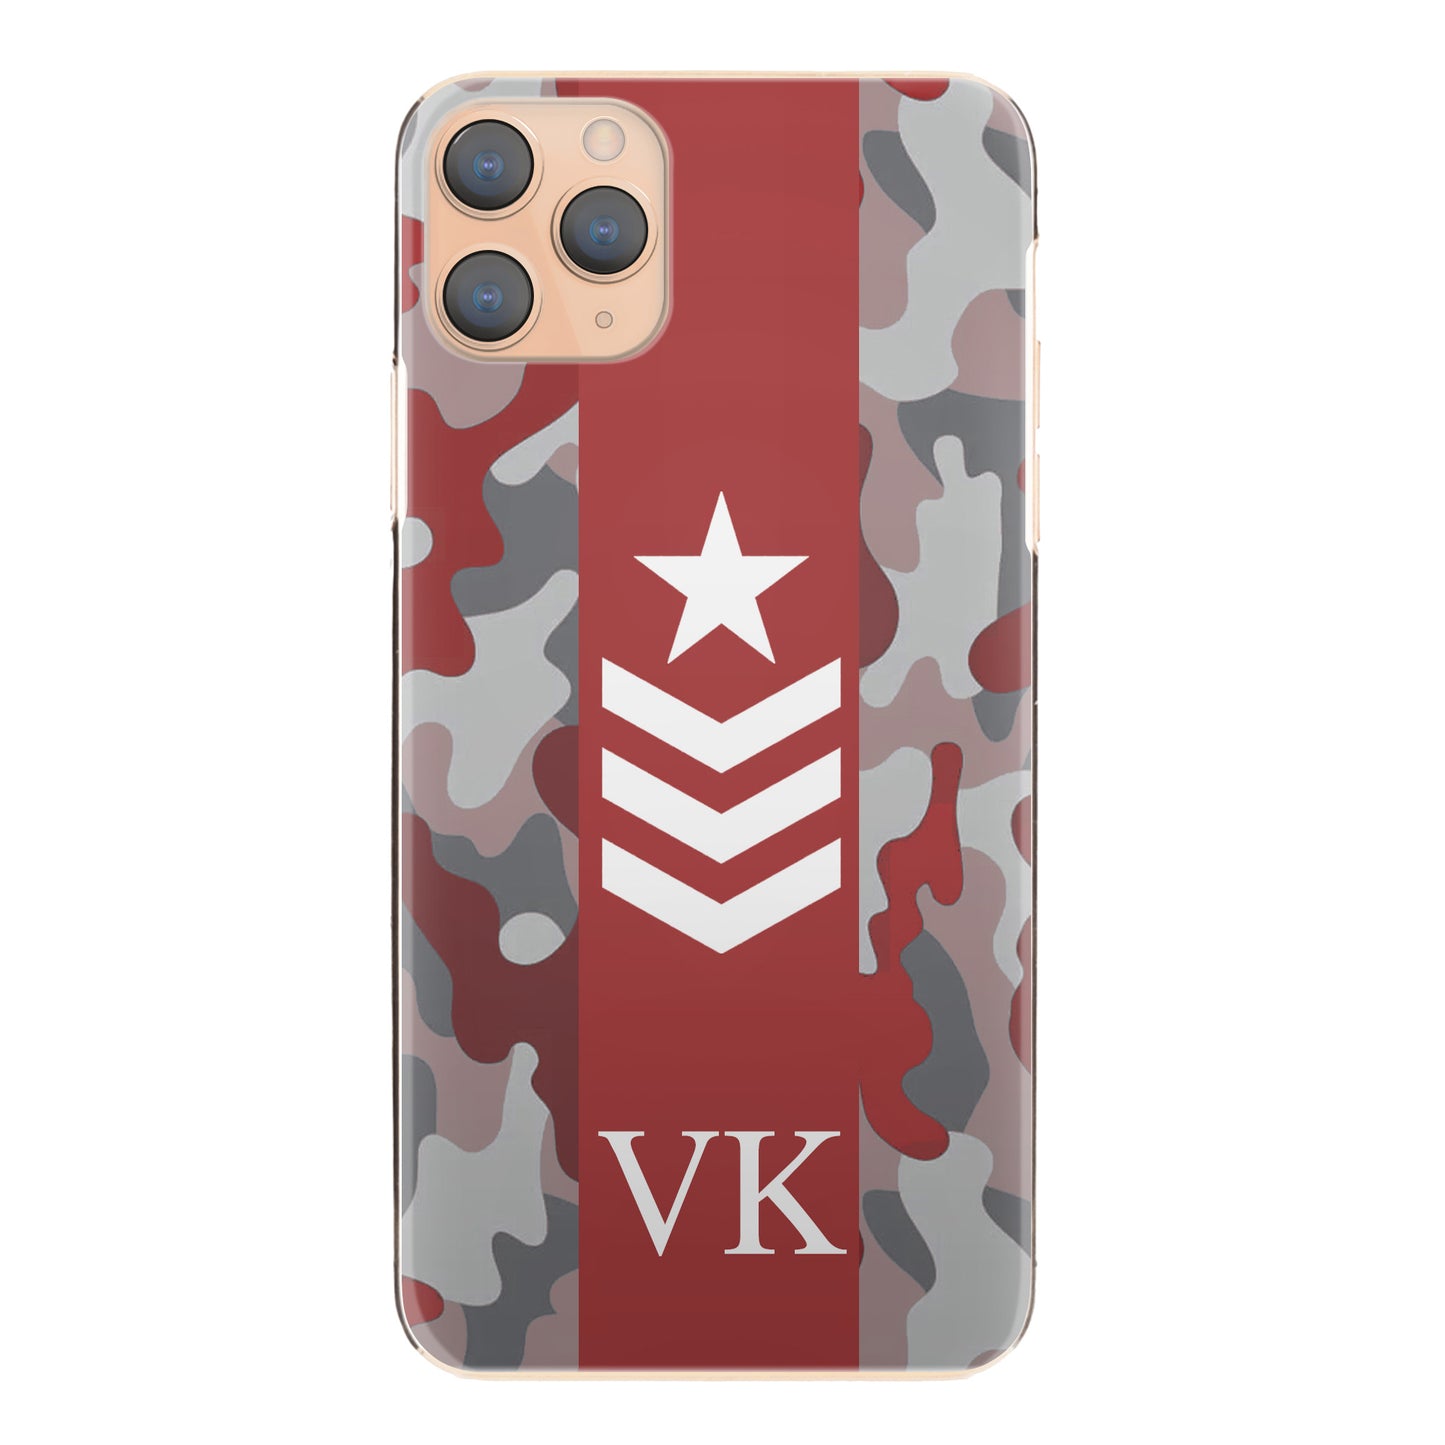 Personalised Oppo Phone Hard Case with Initials and Army Rank on Red Camo